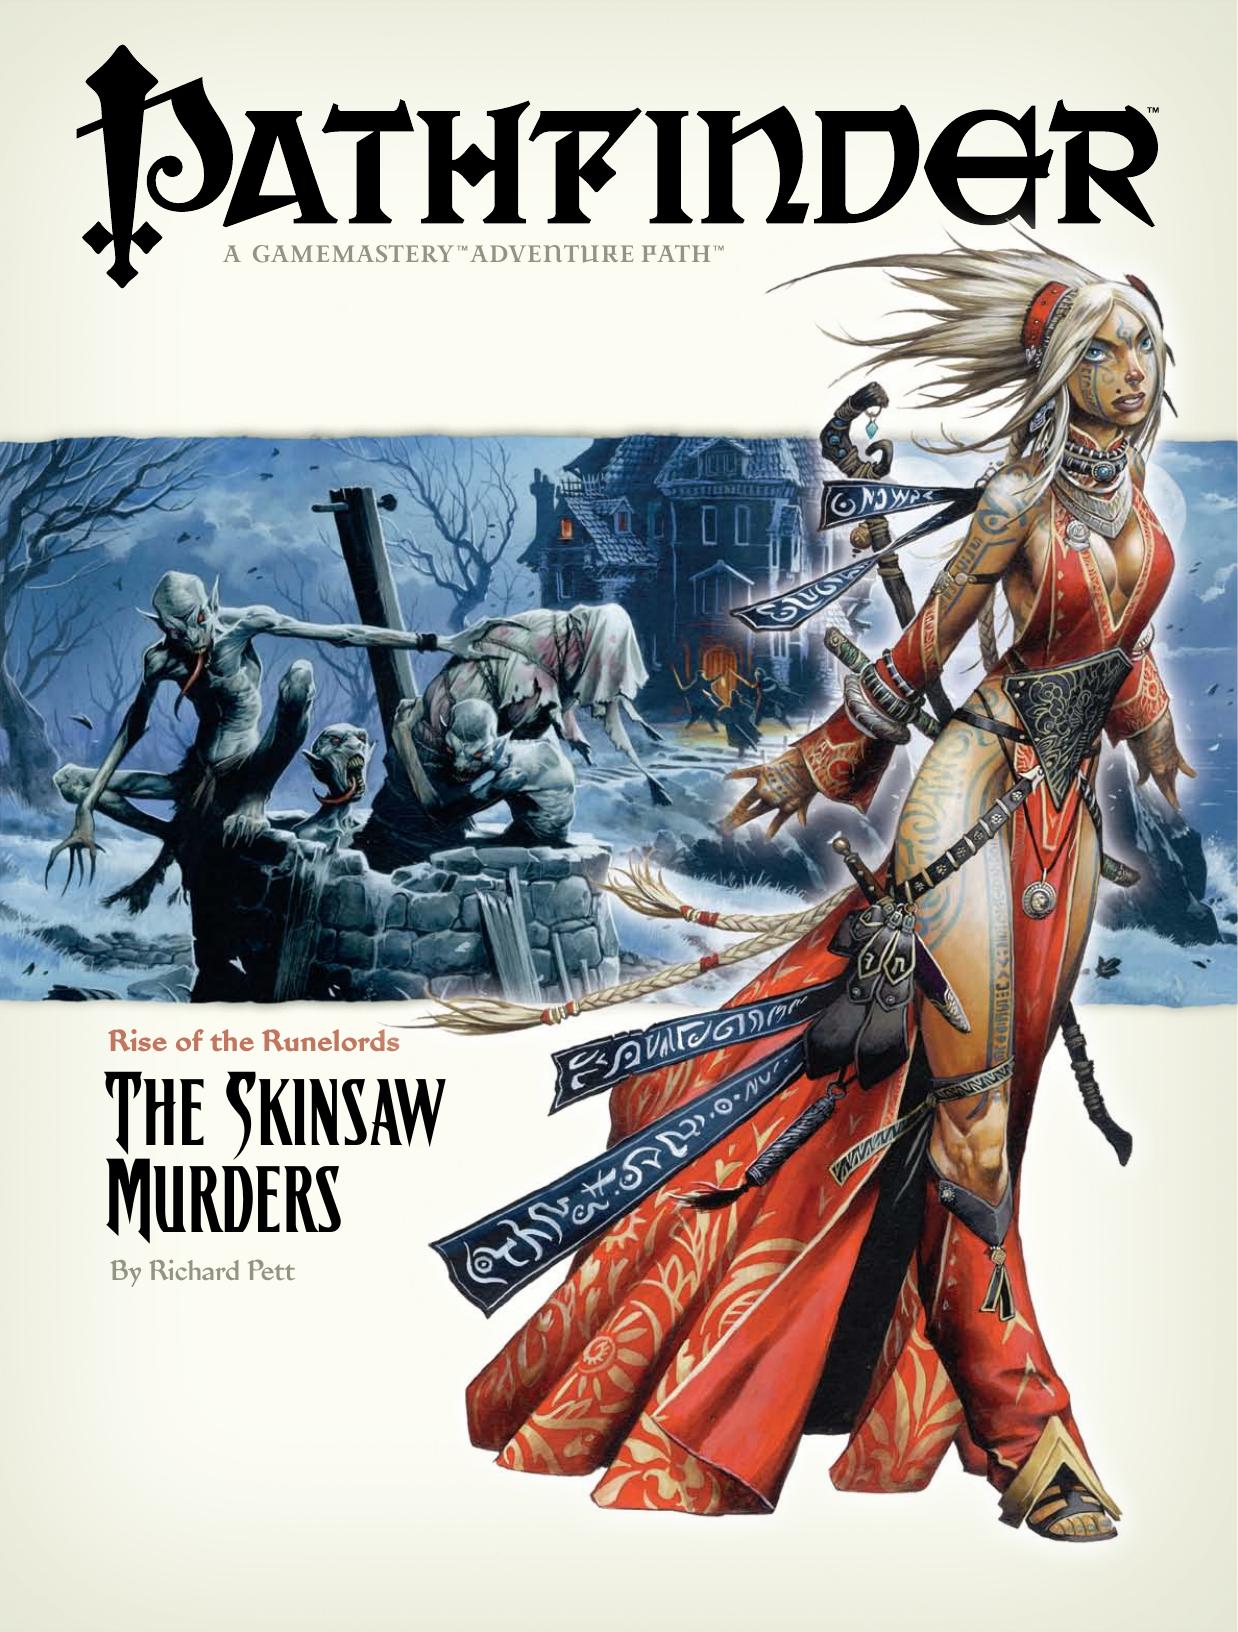 Pathfinder, Rise of the Runelords, Pt. 2: The Skinsaw Murders